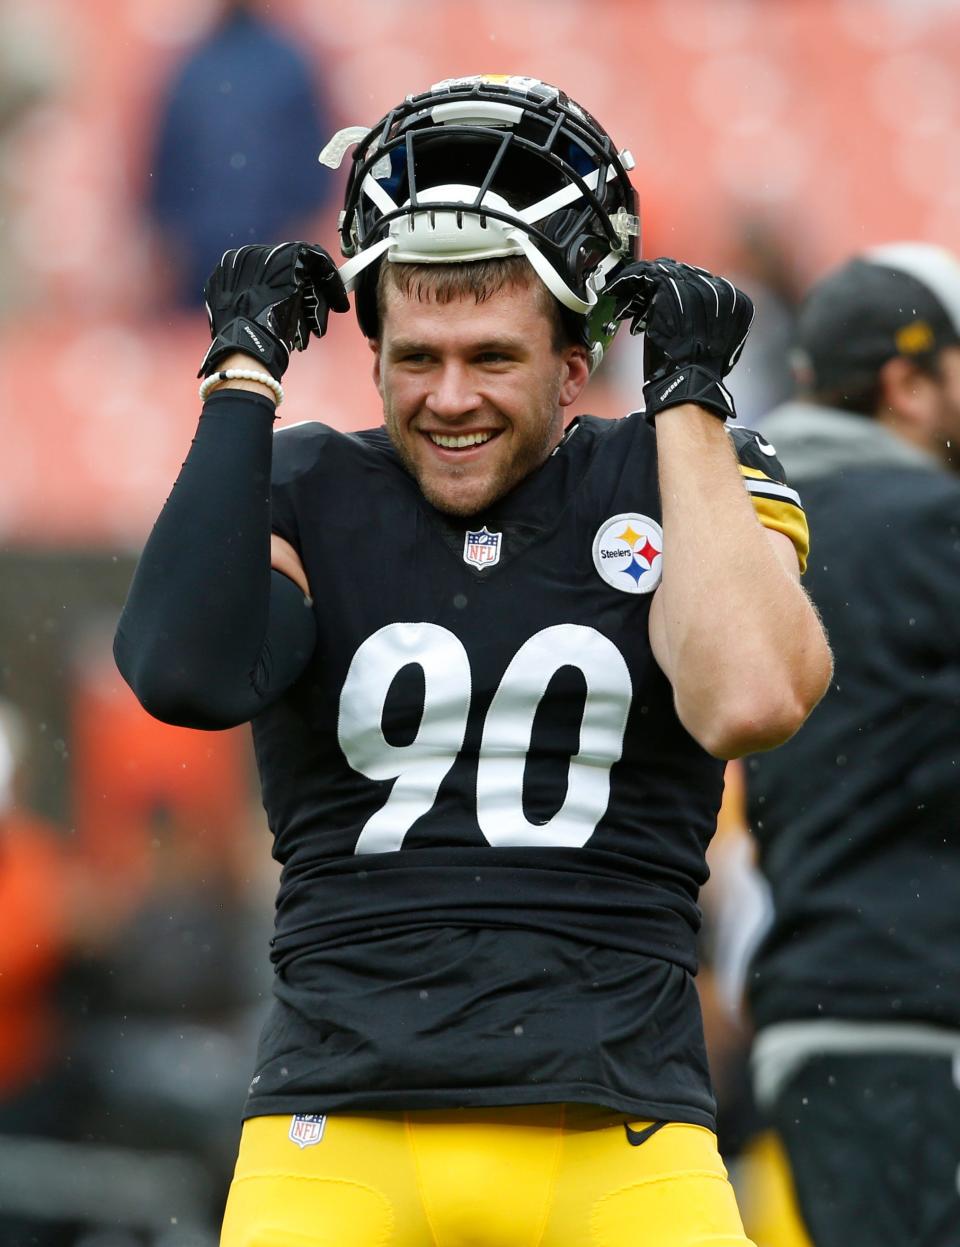 Pittsburgh Steelers linebacker T.J. Watt smiles during warm ups before a game against the Cleveland Browns.